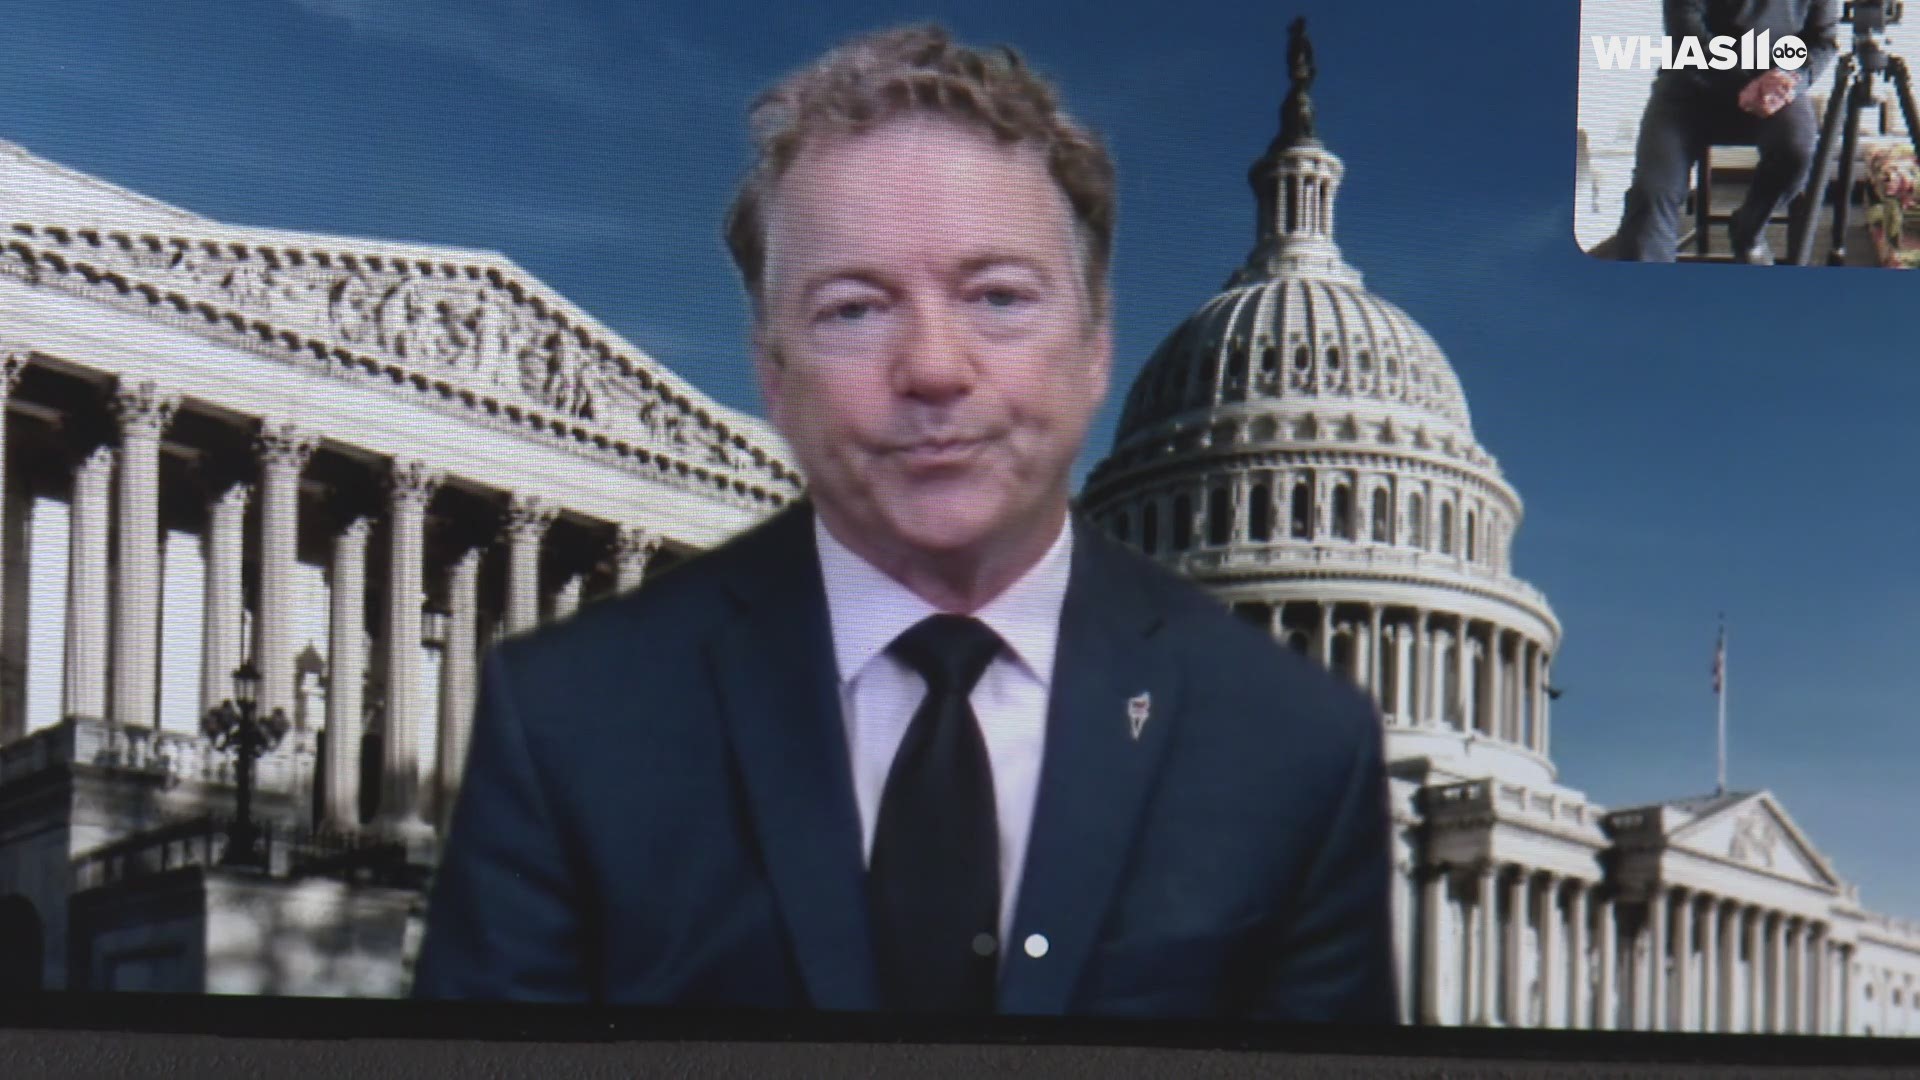 A Kentucky sheriff's office says a suspicious package sent to the home of U.S. Sen. Rand Paul, in Bowling Green, appears to contain a non-toxic substance